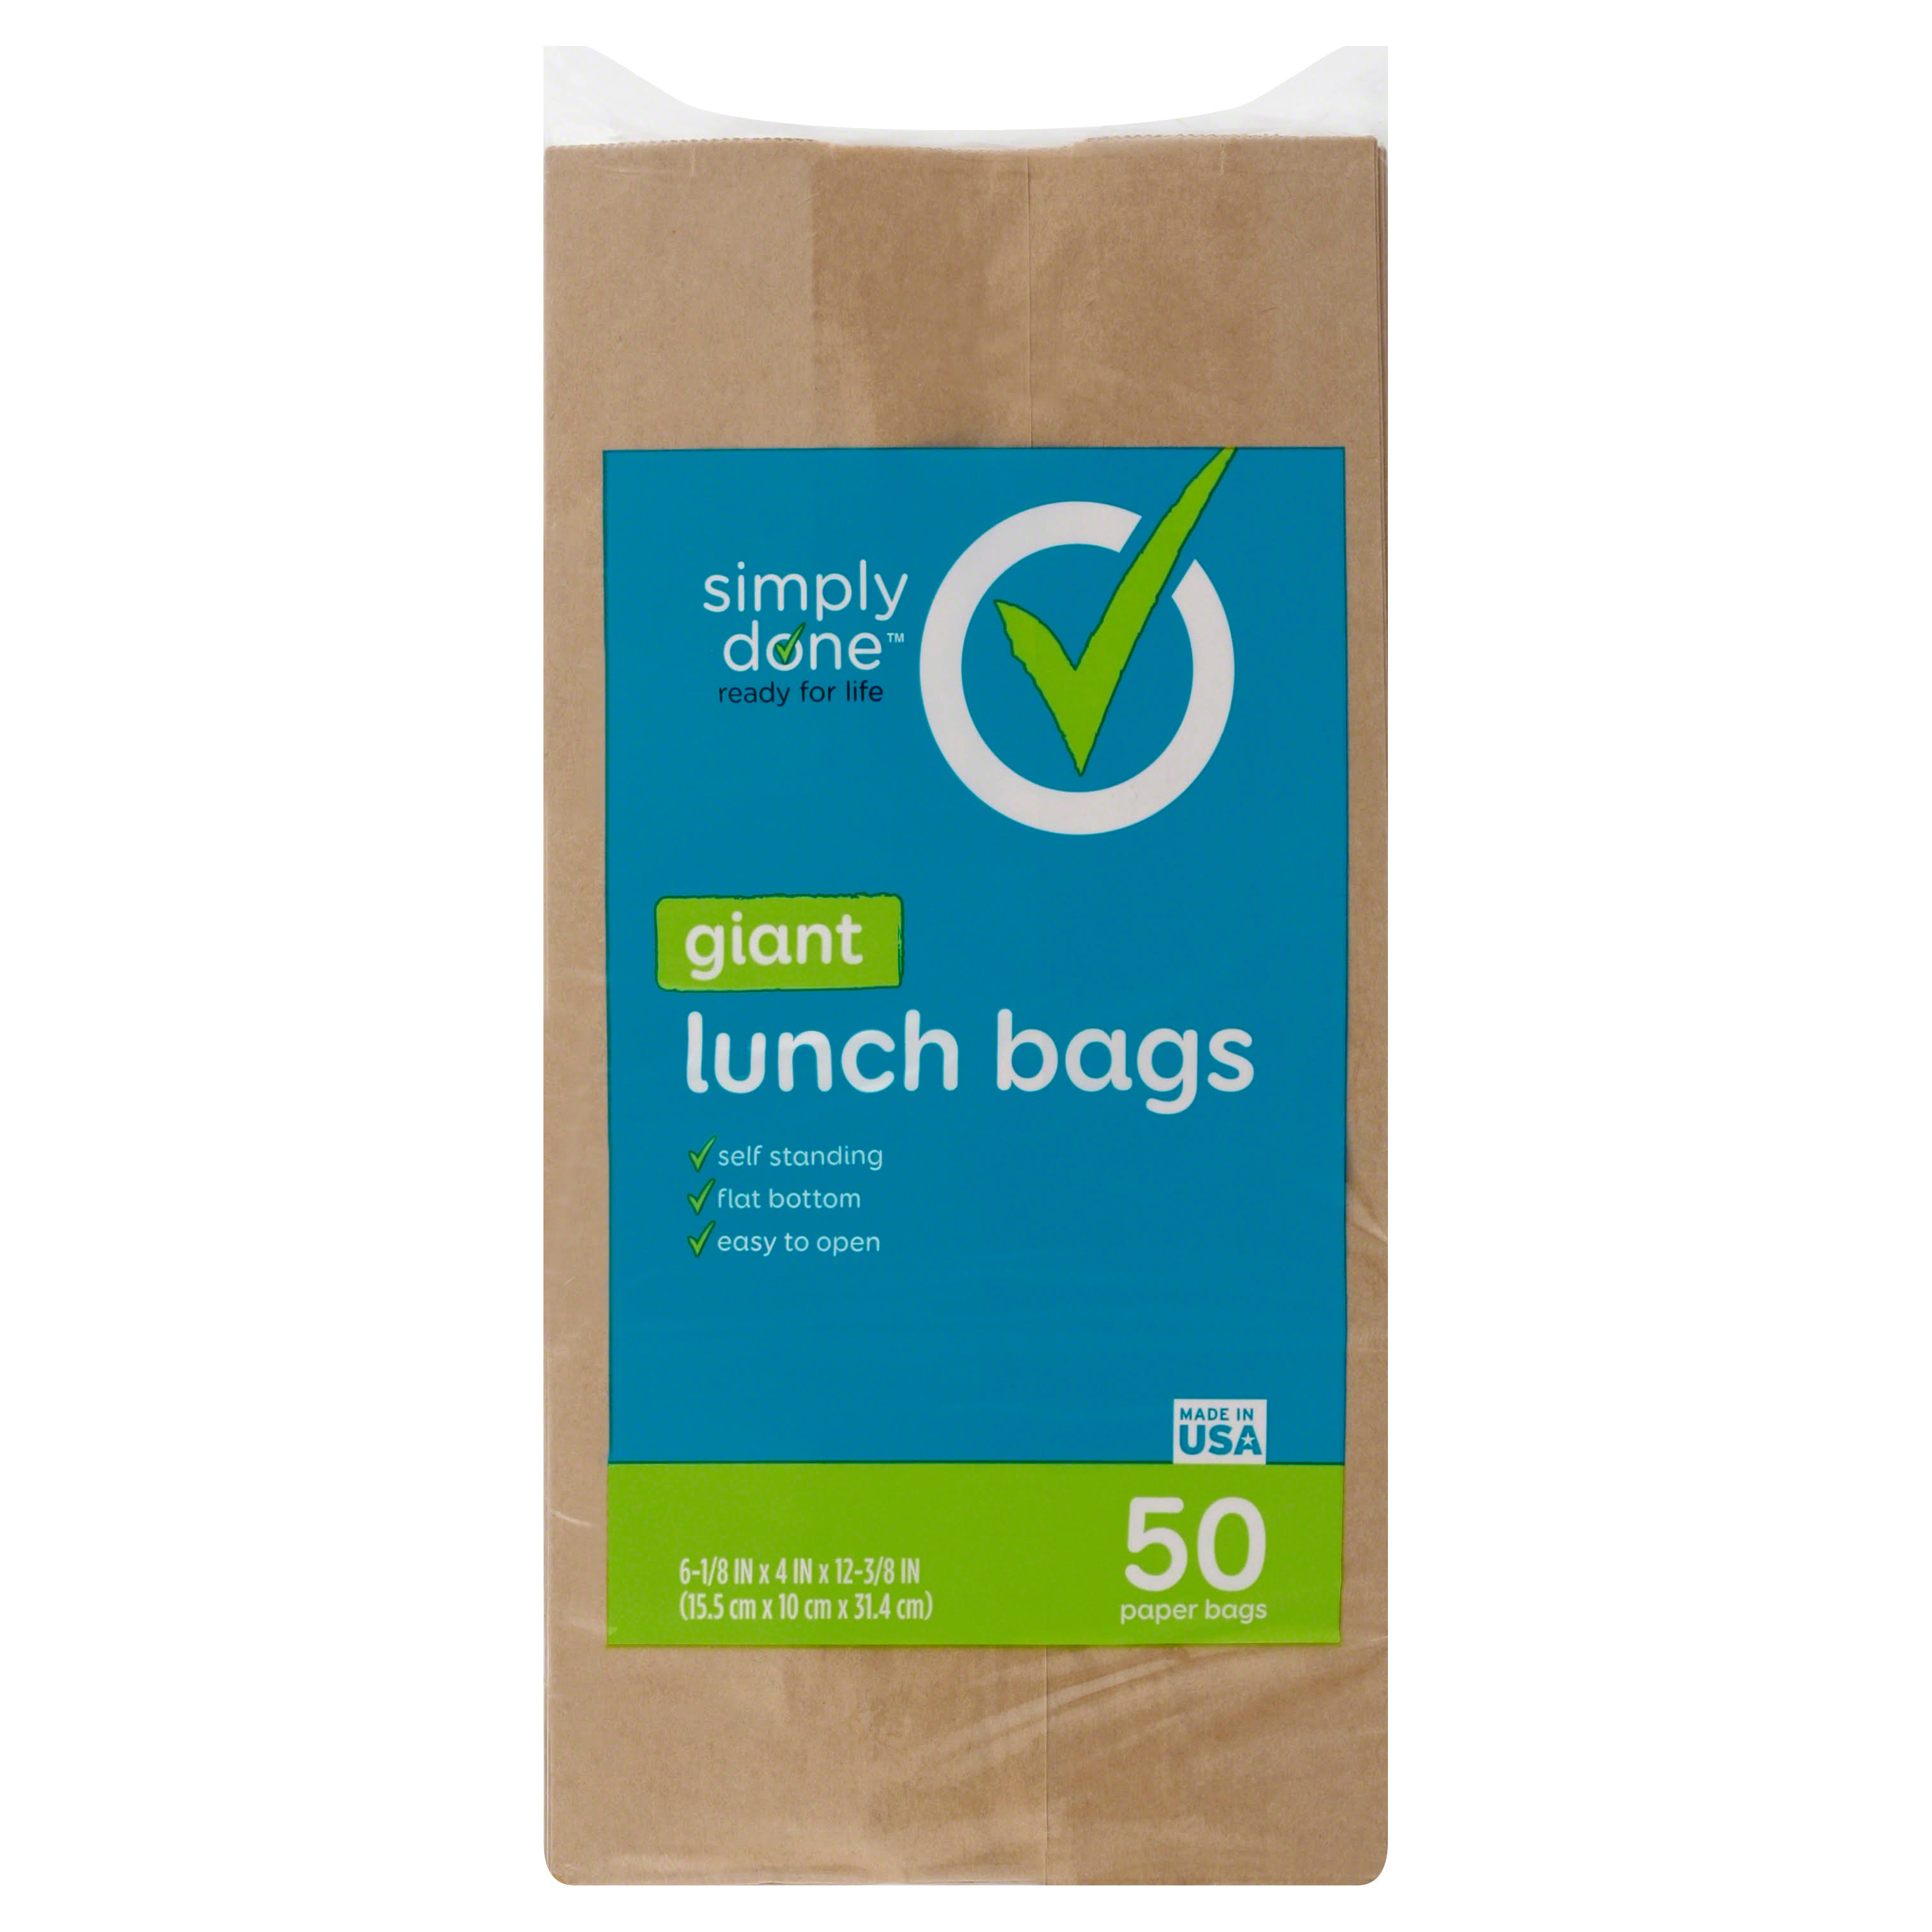 Simply Done Lunch Bags, Giant - 50 bags